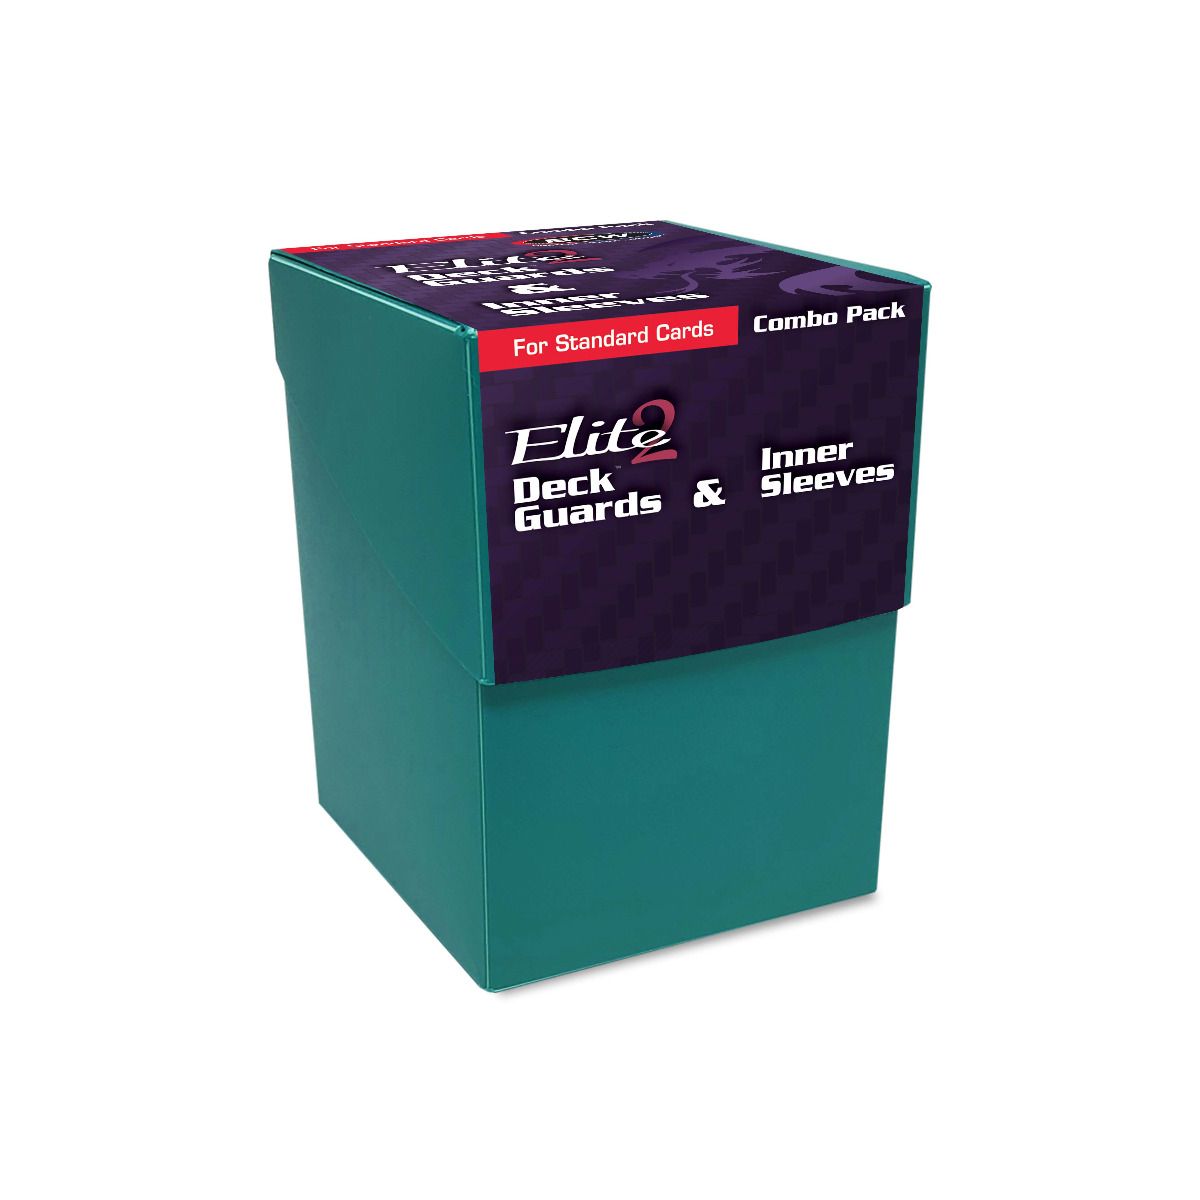 BCW Deck Case Box, Deck Protectors and Inner Sleeves Standard Elite2 Combo Pack Glossy Teal